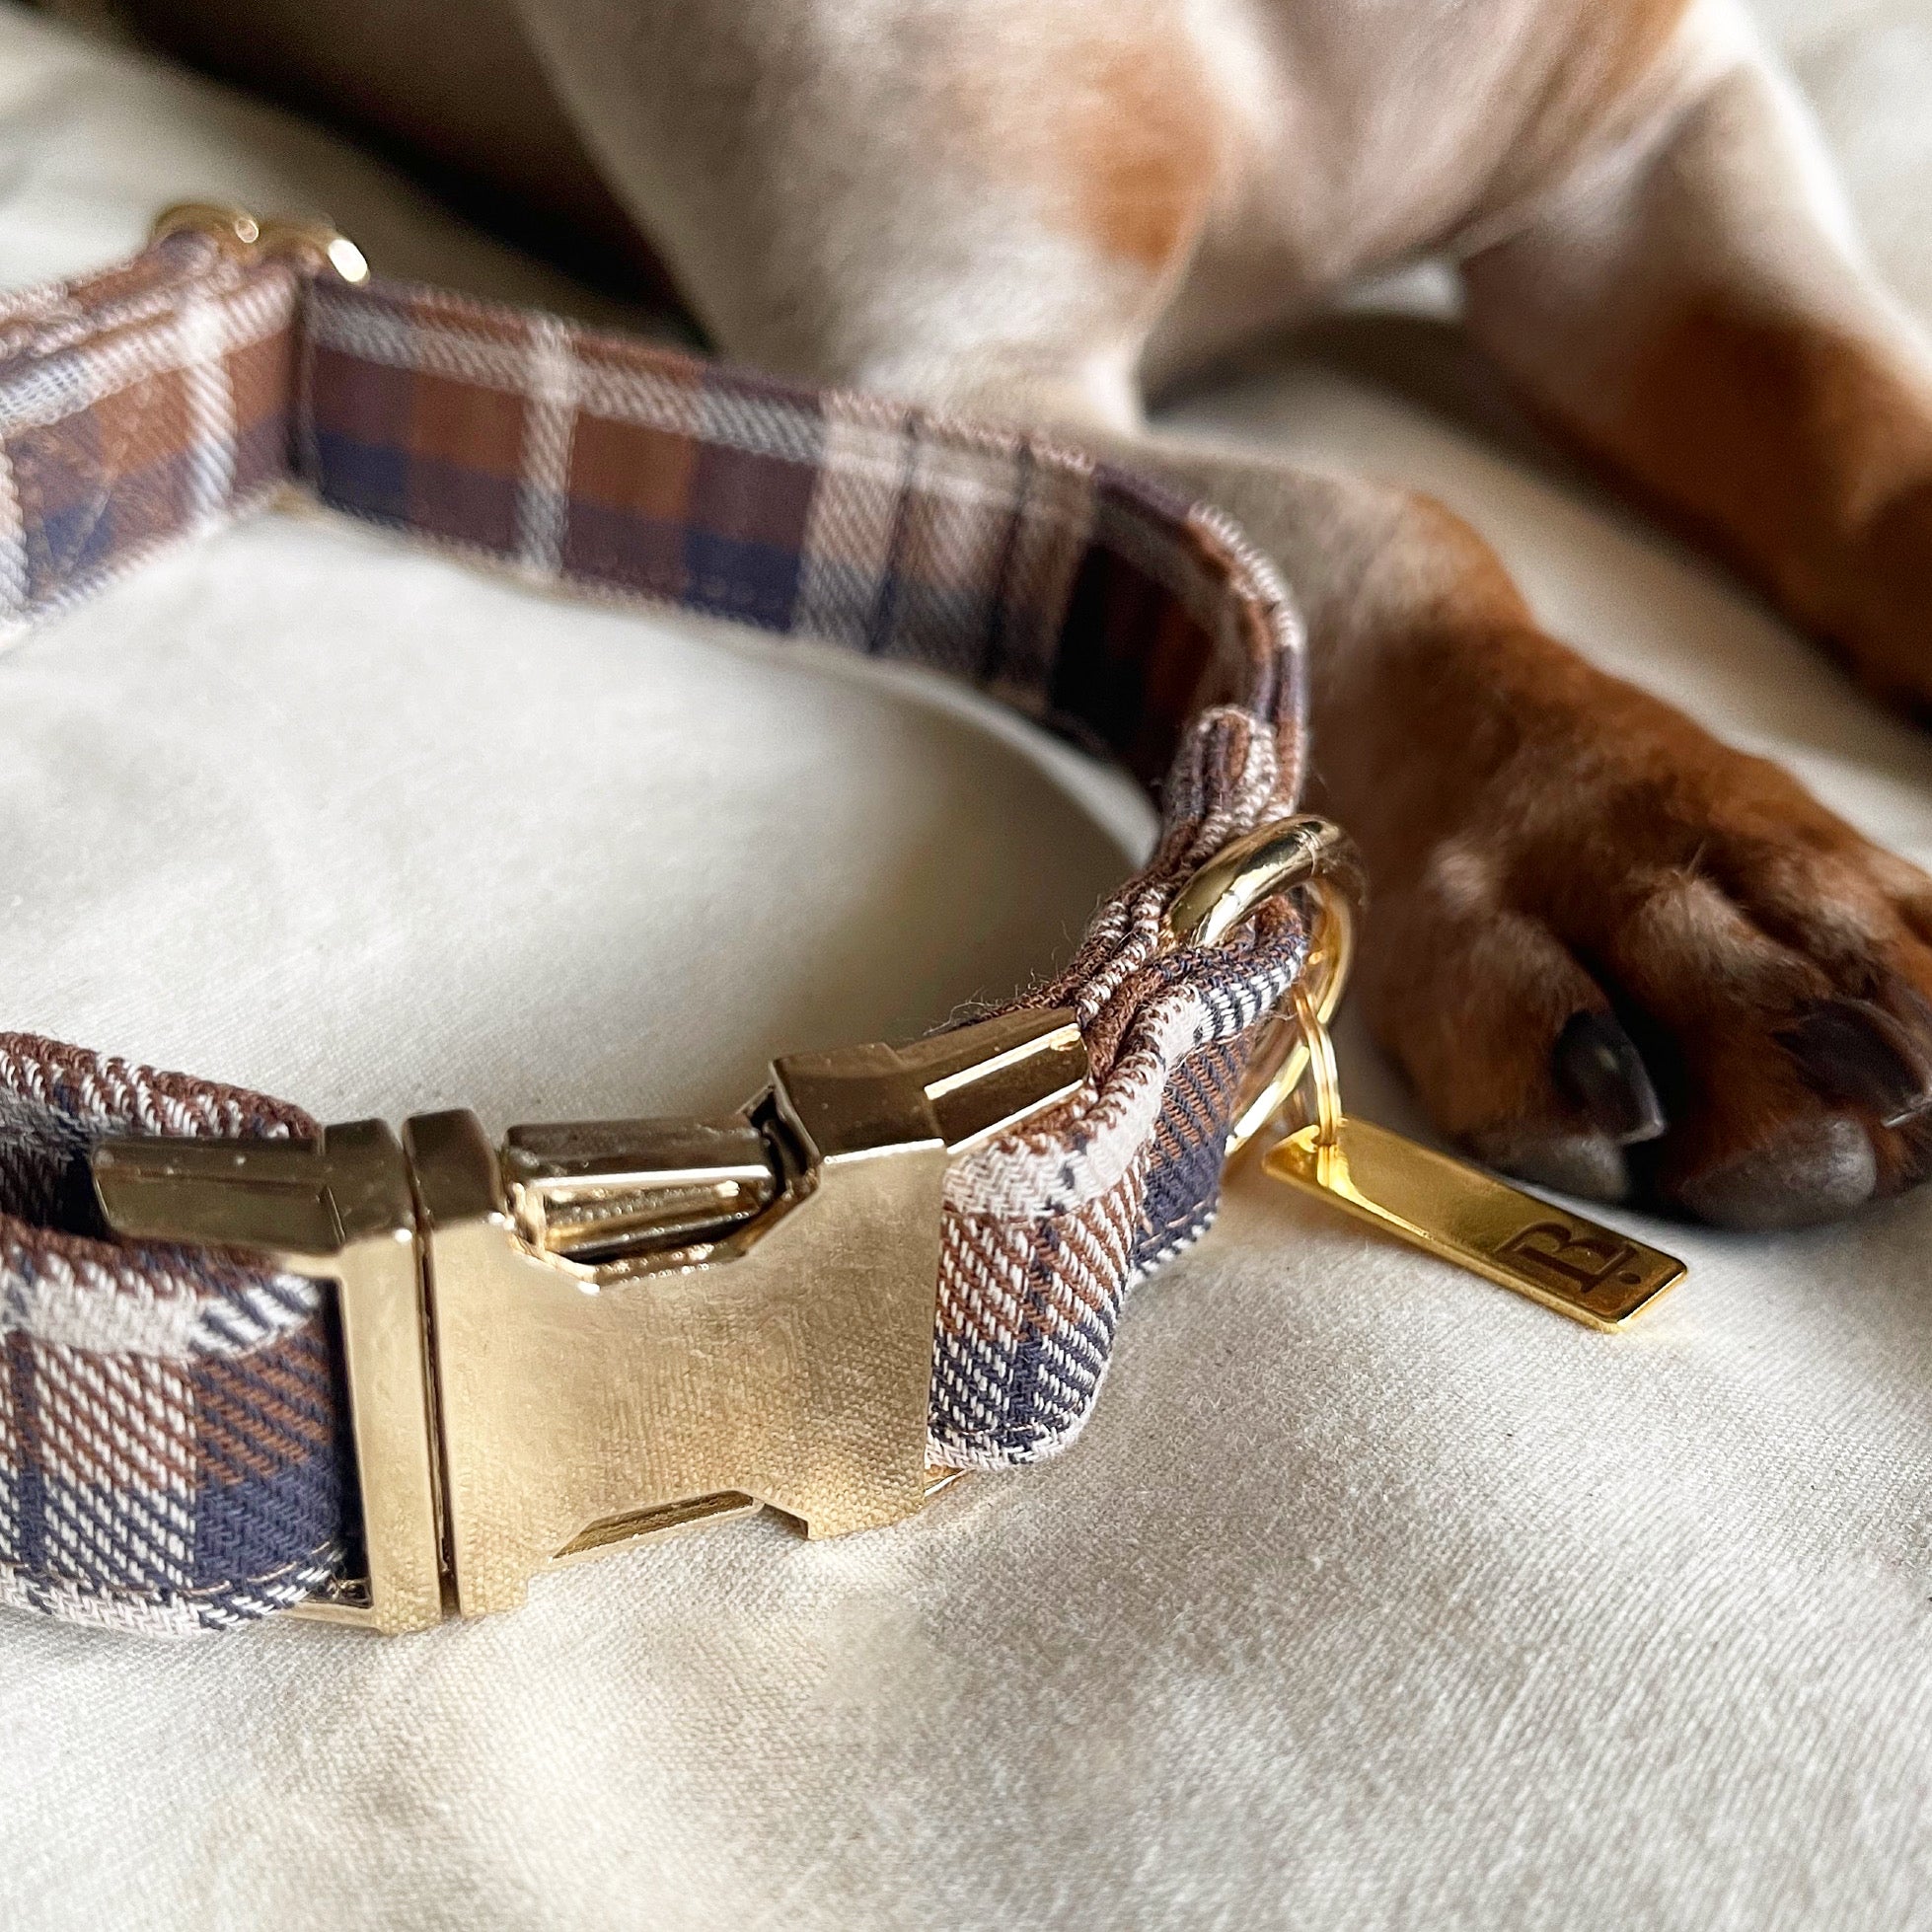 Collar in Ginger Plaid, Gold hardware